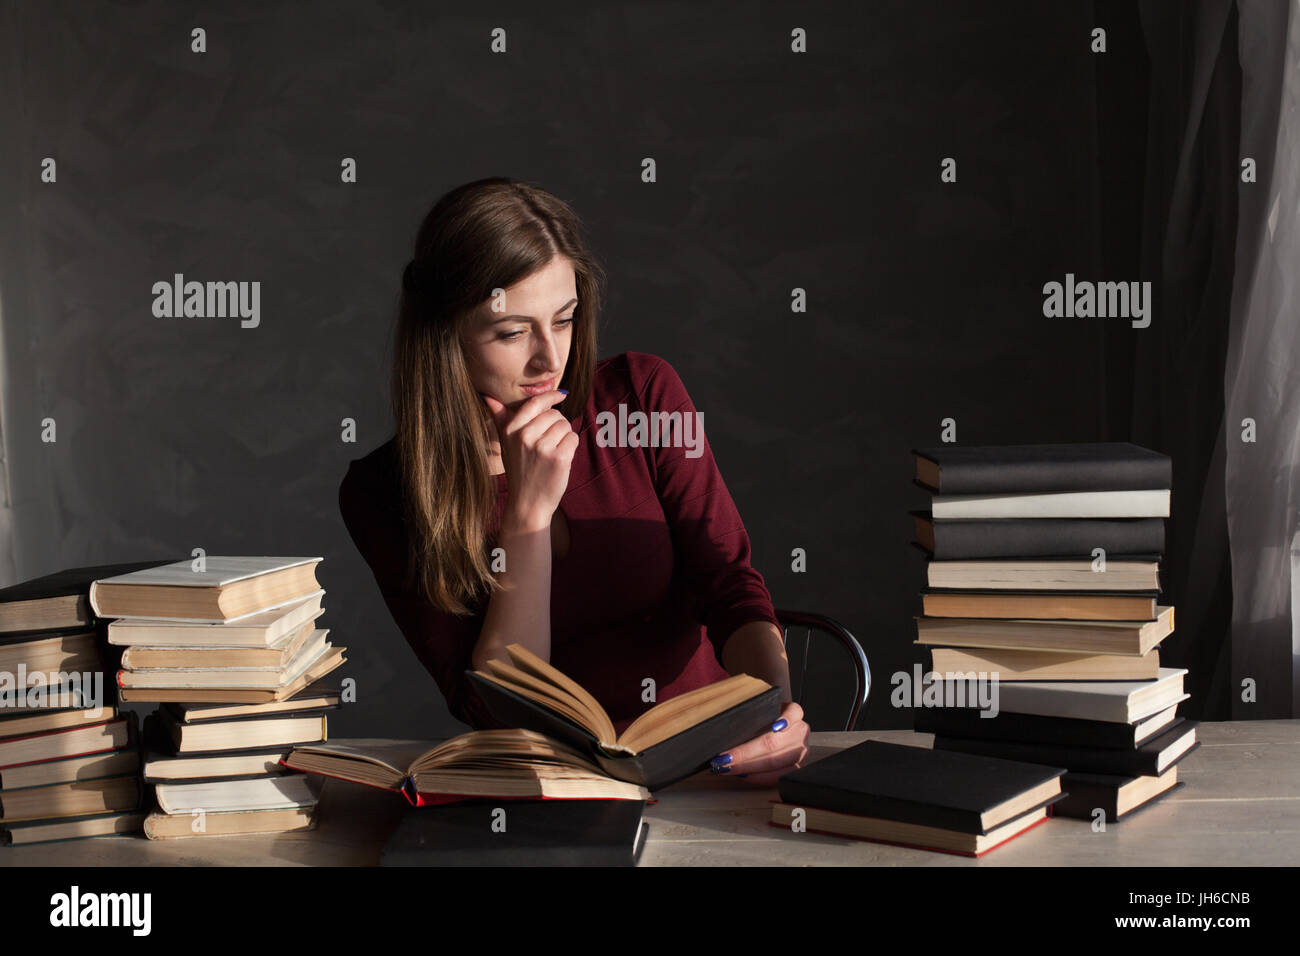 the girl sitting at the table reading a lot of books Stock Photo